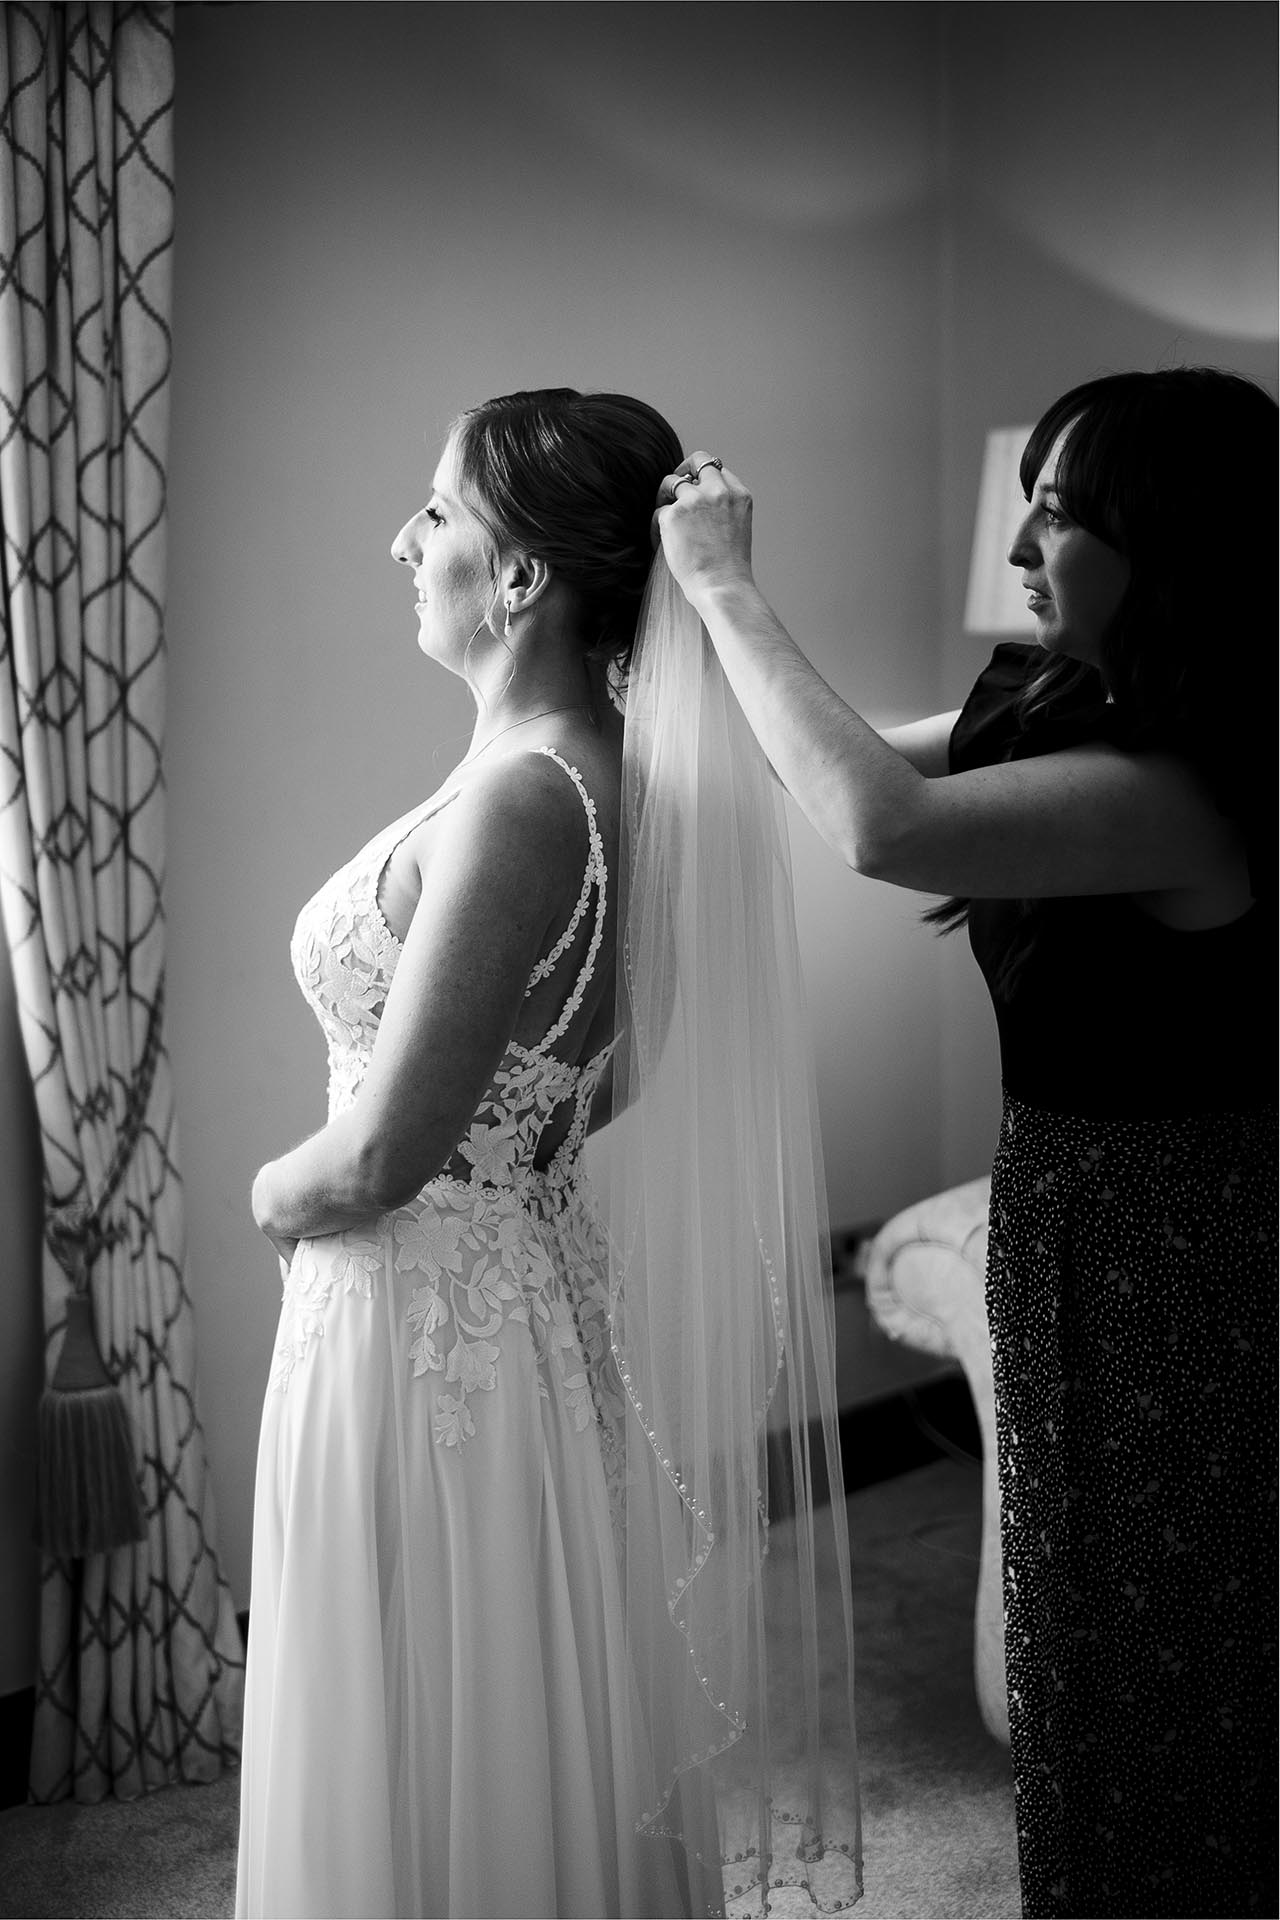 Black and white reportage wedding photography of bridal preparations before the wedding ceremony at Leez Priory, Great Leighs, Chelmsford by Essex wedding photographer